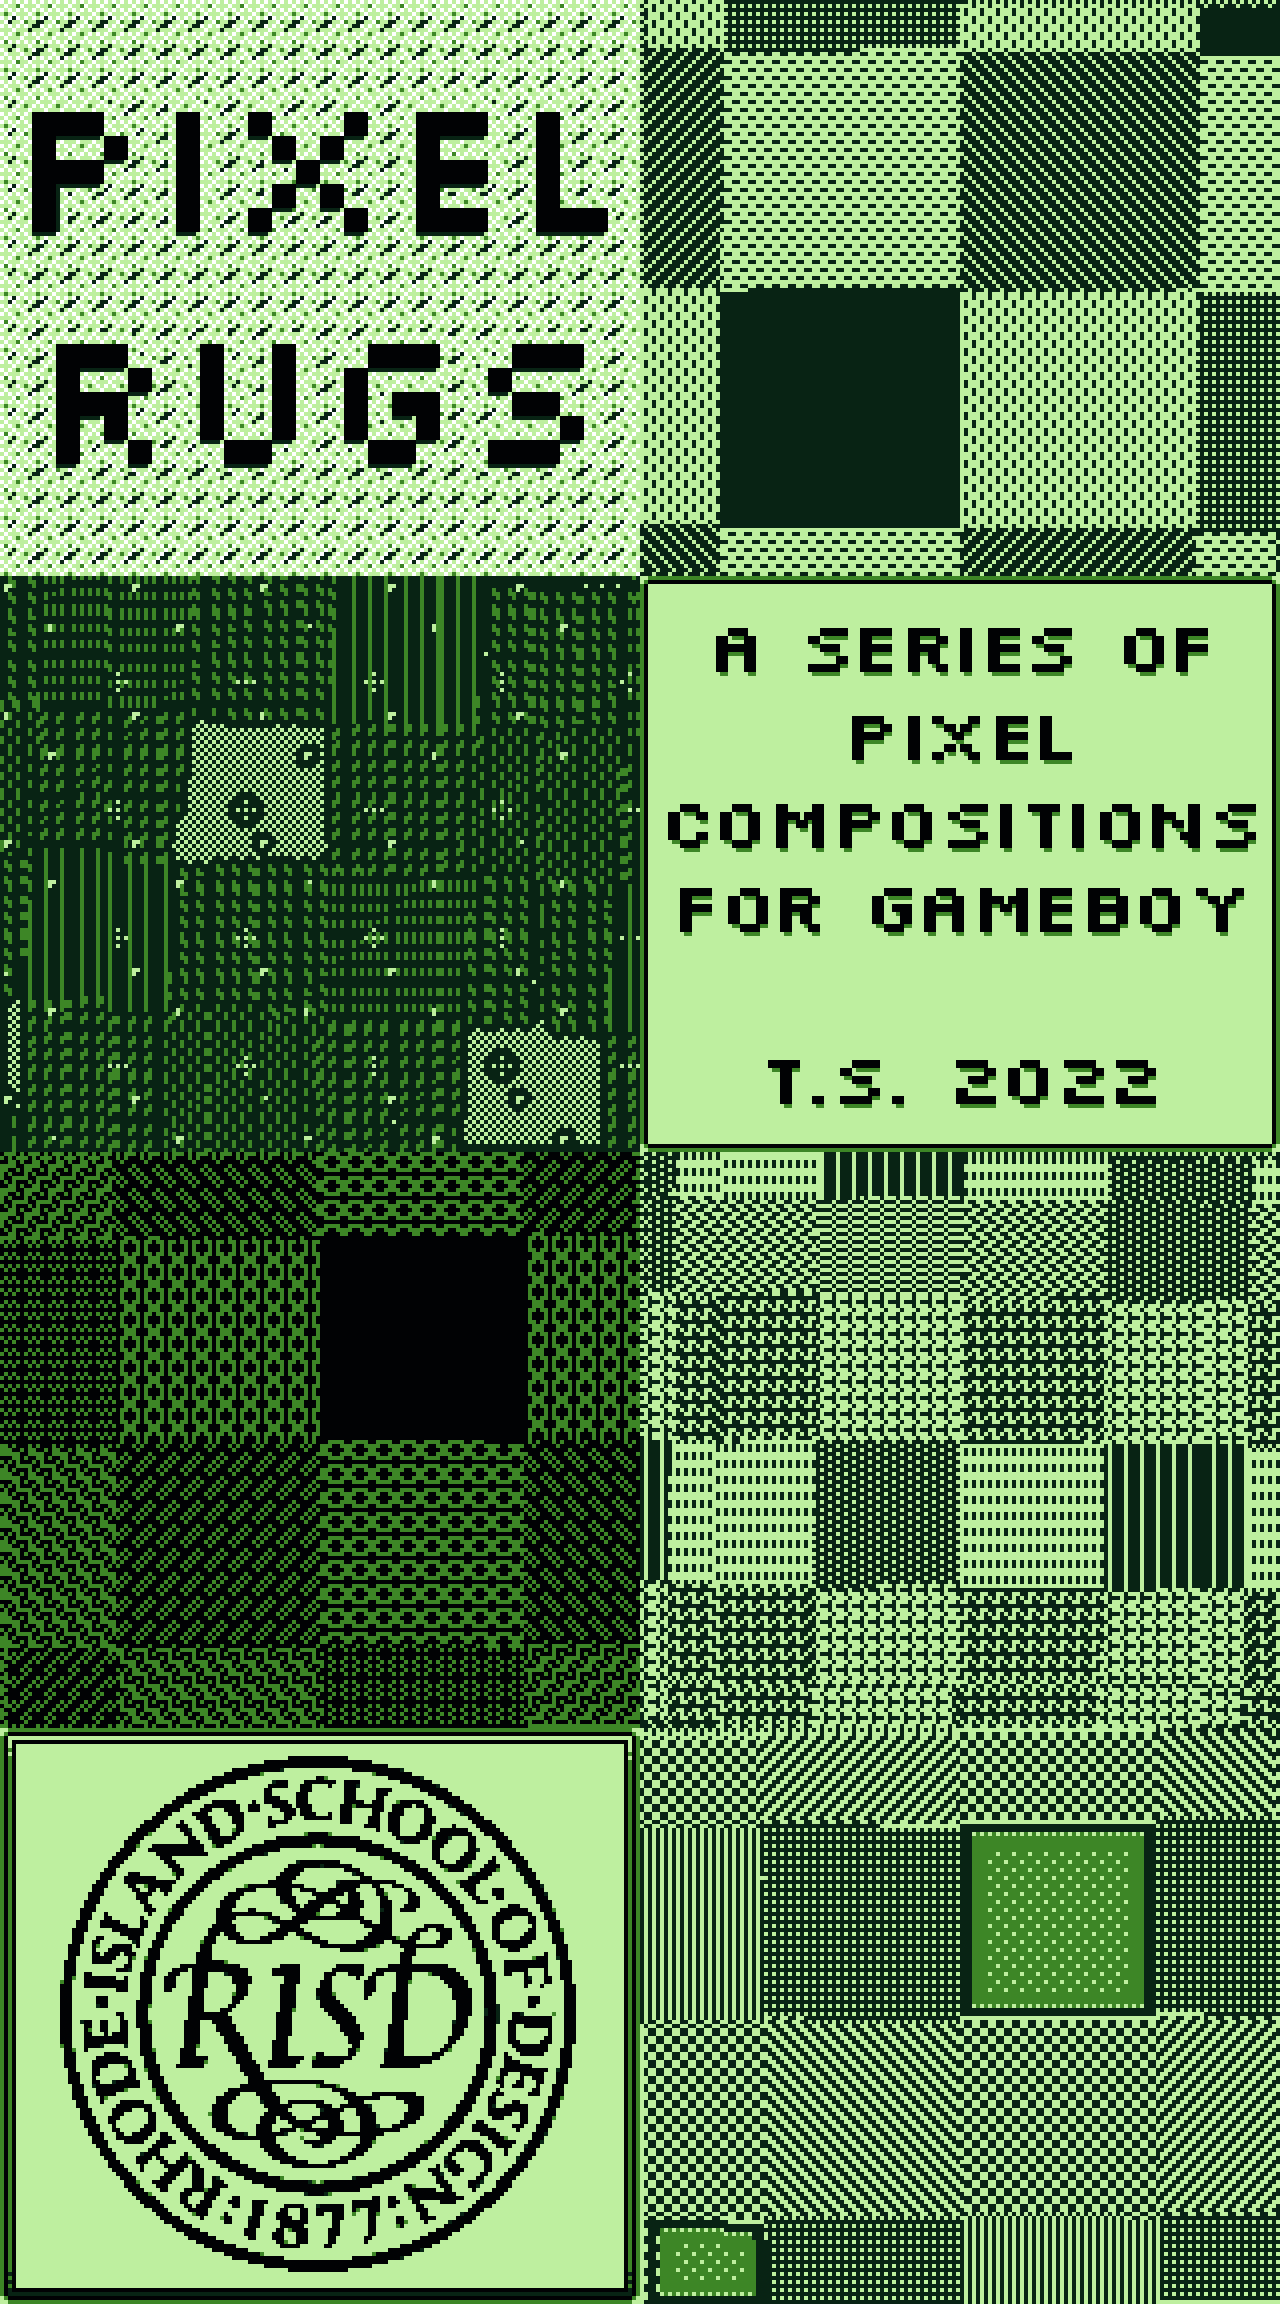 A collection of eight screenshots documenting Pixel Rugs, an Interactive slideshow for Game Boy. The screenshots show the title screen, various pixel rugs, and the RISD logo in a 1-bit Game Boy color palette.